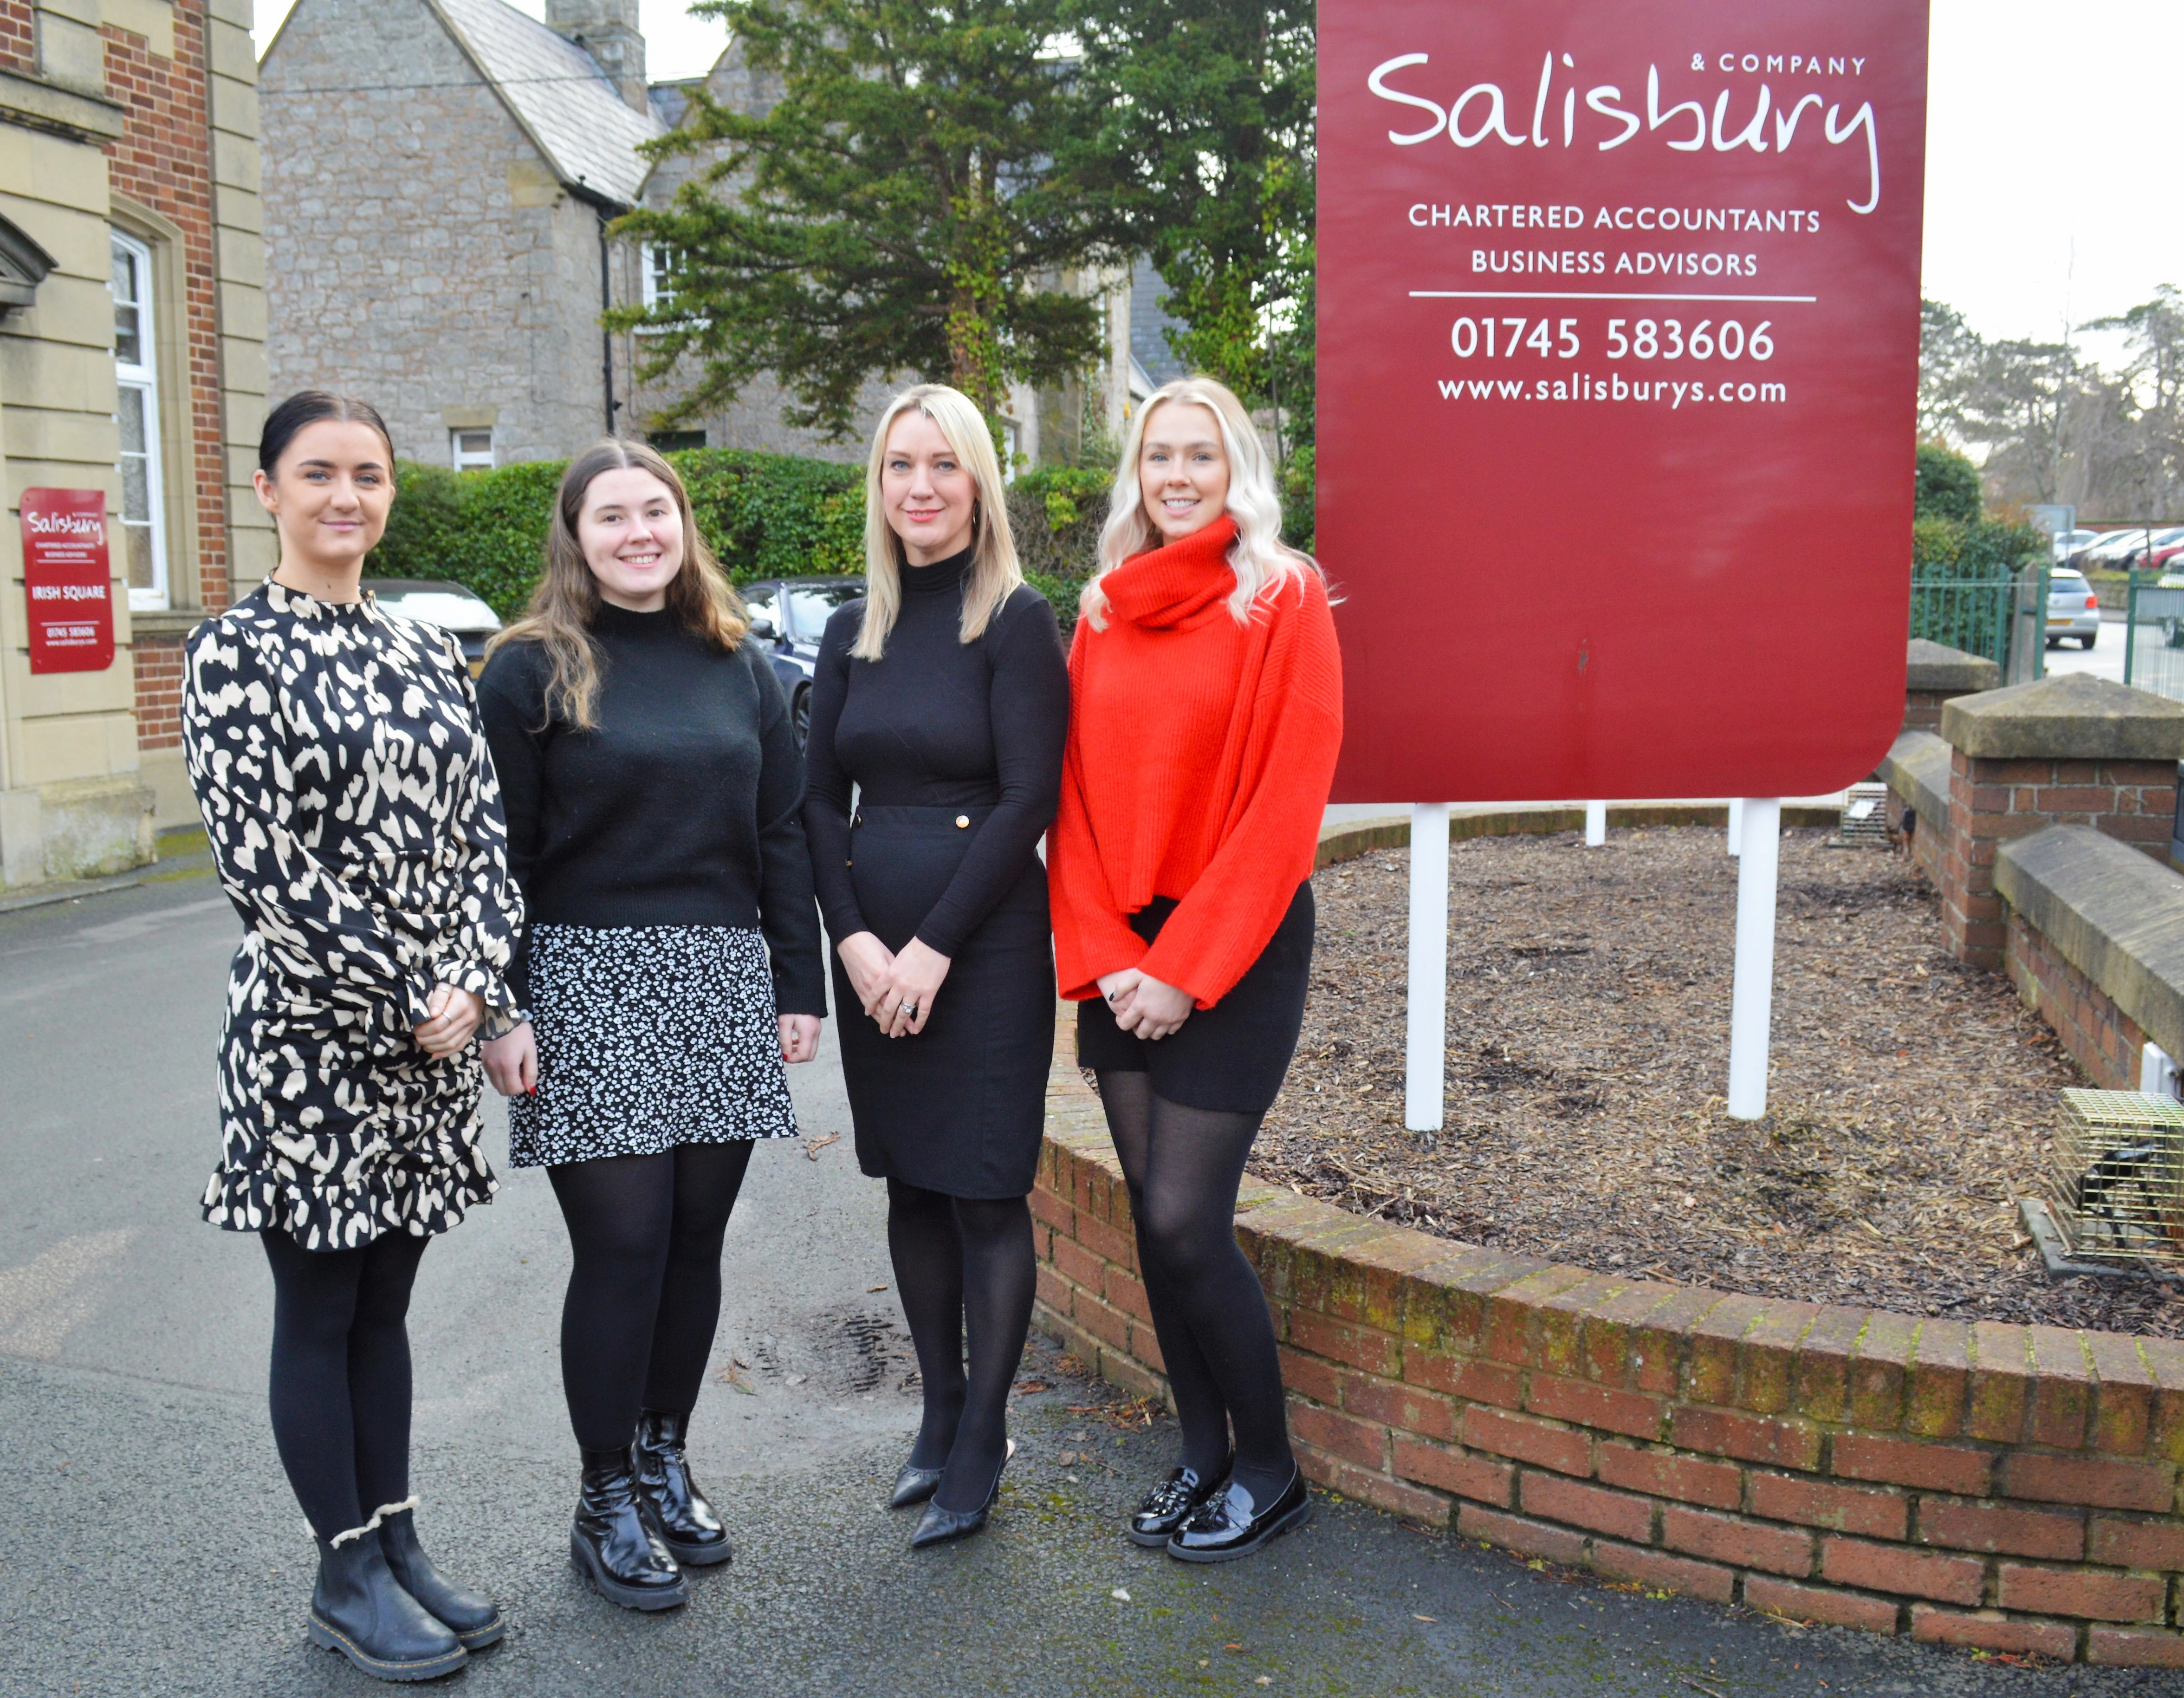 Based in St Asaph, Menai Bridge, Ruthin and Beaumaris, Salisbury’s Chartered Accountants has seen apprentices and long-standing team members move on to new roles in past weeks.